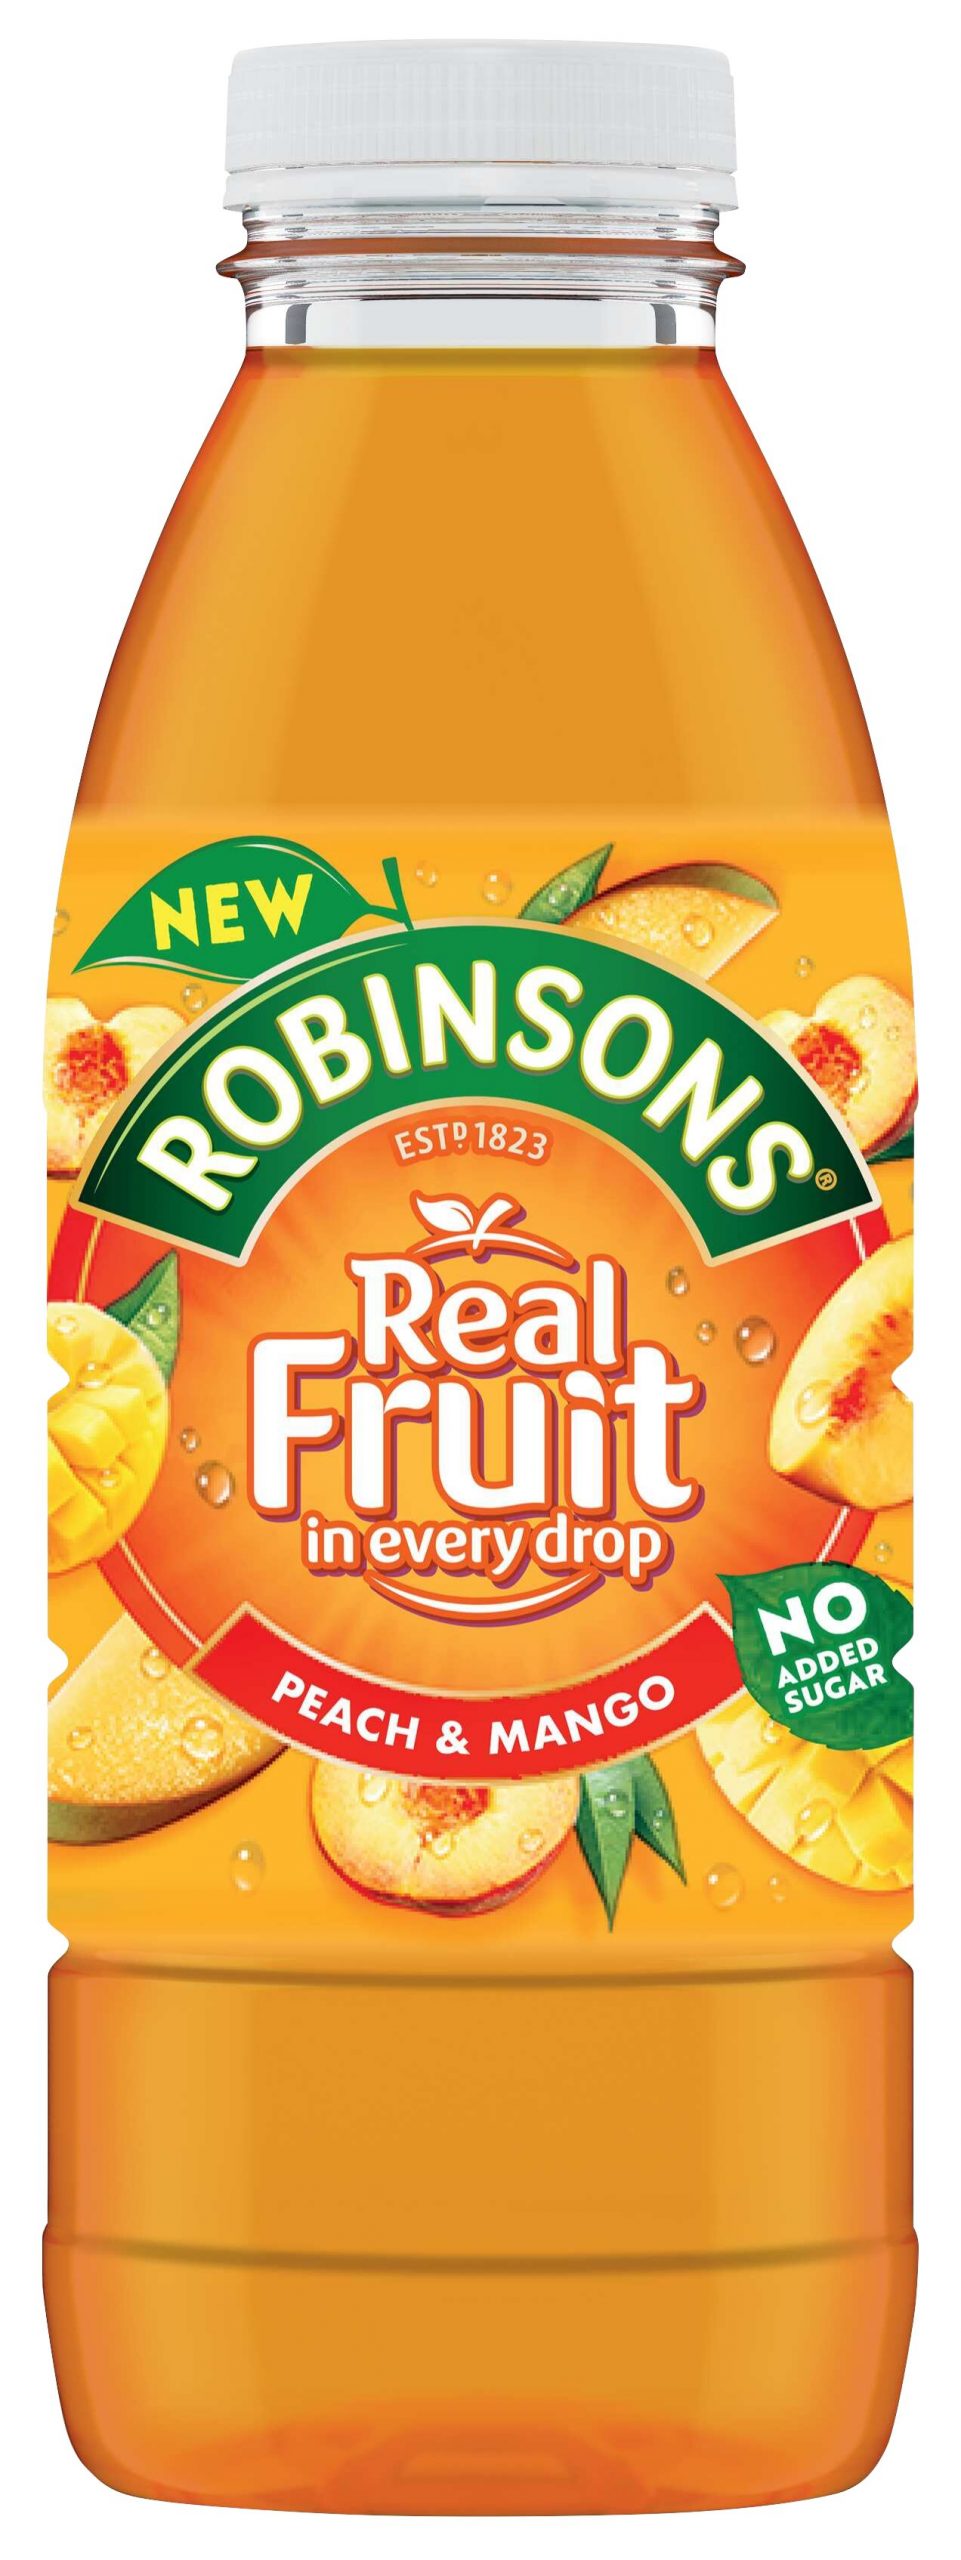 Robinsons introduces  new ready-to-drink offering